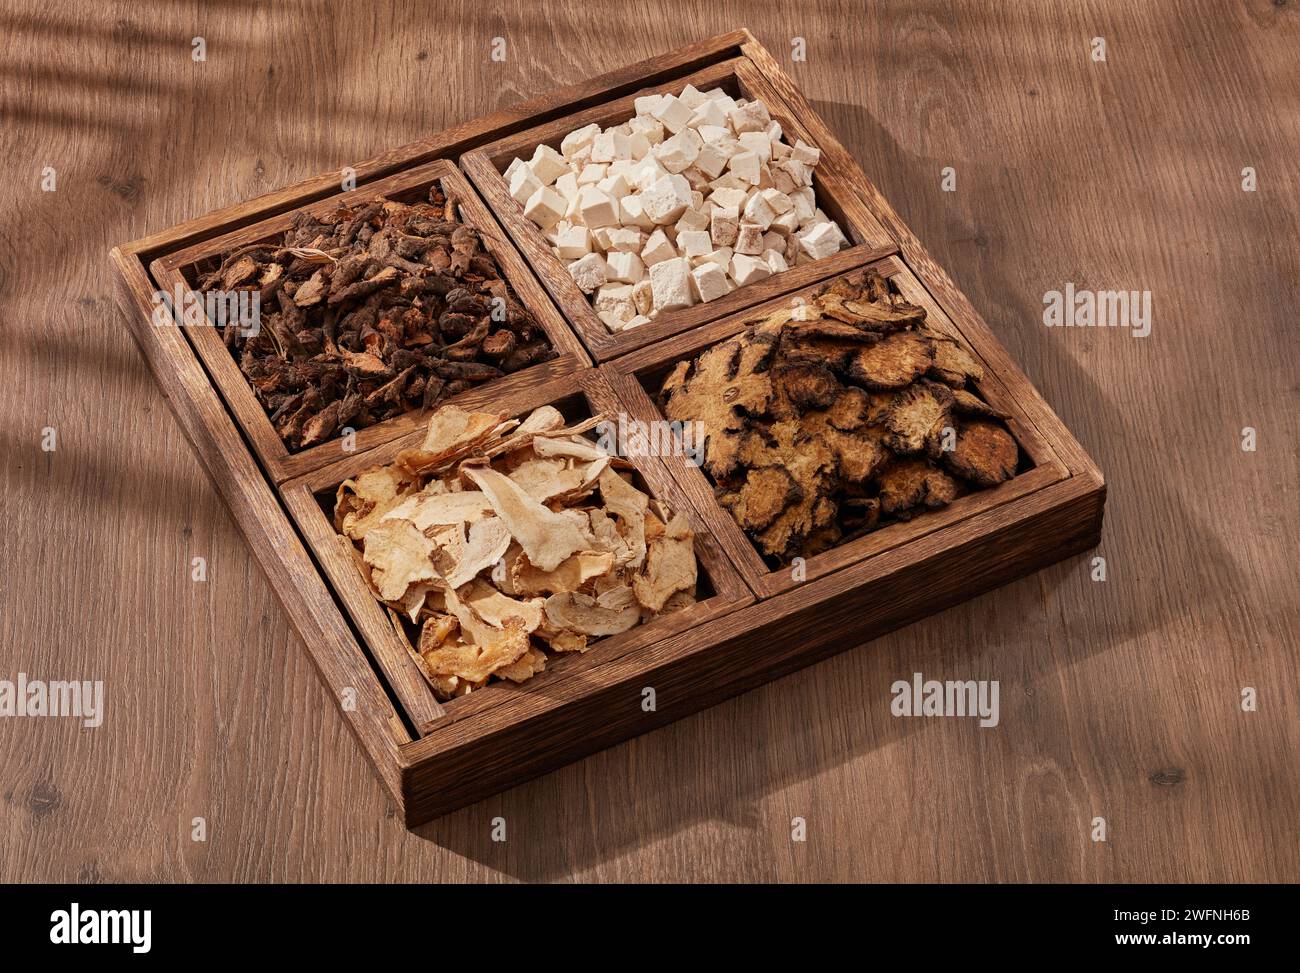 A square wooden tray with 4 compartments containing Poria cocos, Szechuan Lovage Rhizome and other herbs. Traditional chinese medicine concept Stock Photo